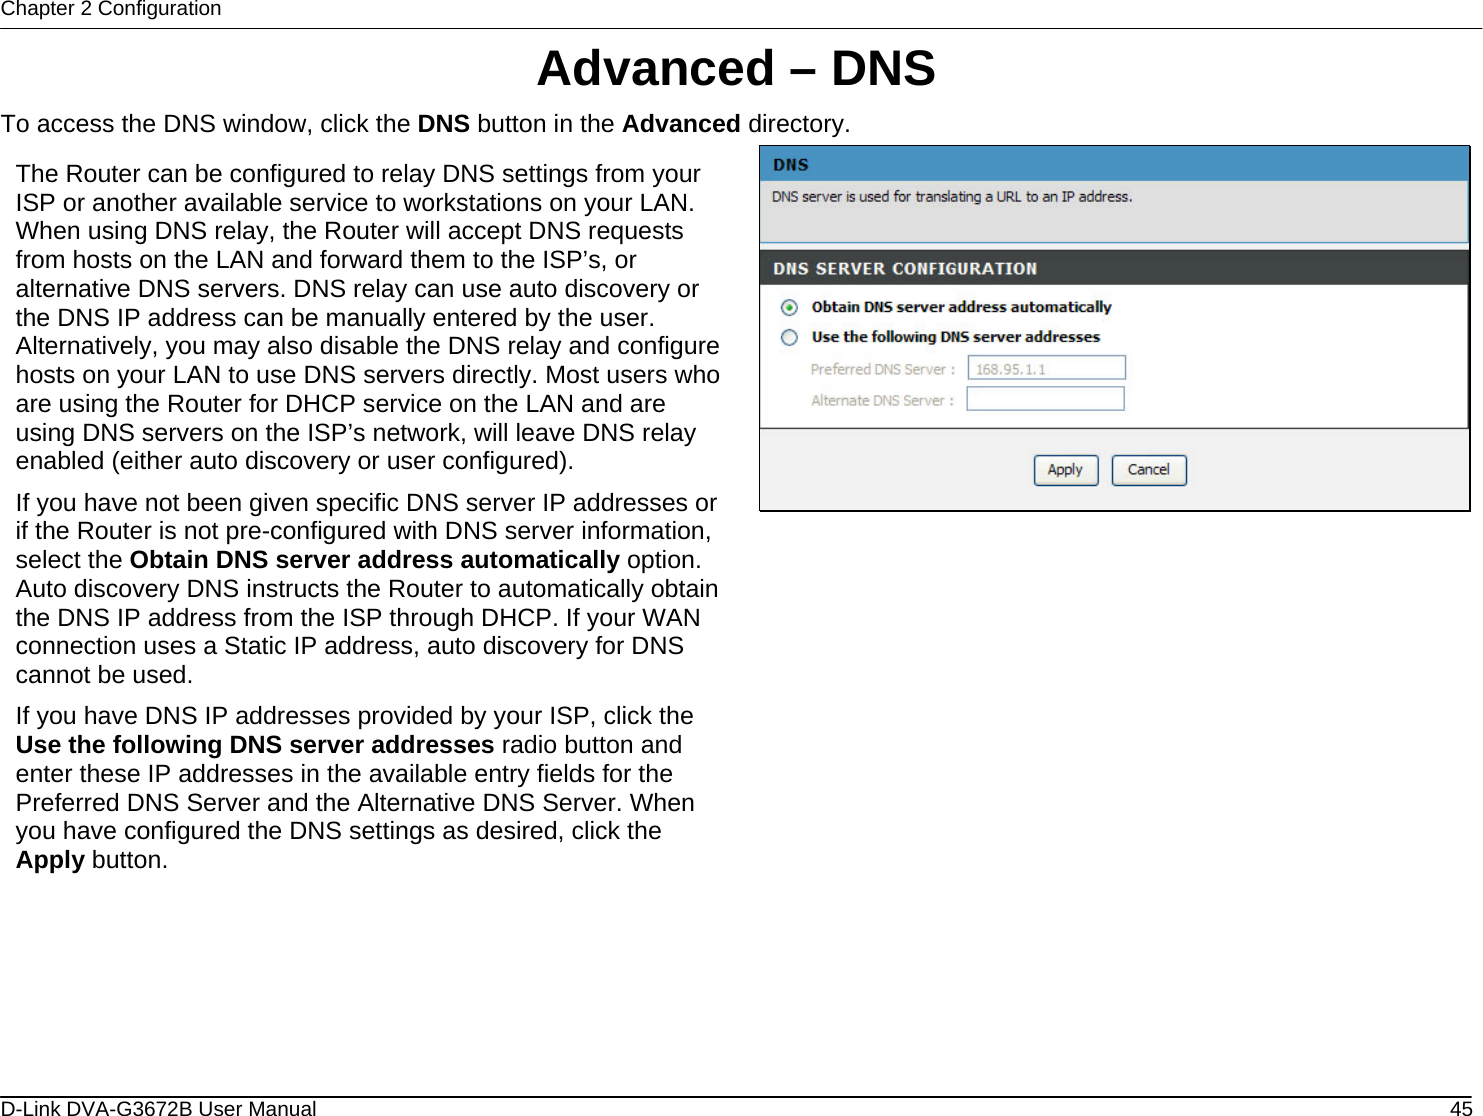 Chapter 2 Configuration Advanced – DNS To access the DNS window, click the DNS button in the Advanced directory.  The Router can be configured to relay DNS settings from your ISP or another available service to workstations on your LAN. When using DNS relay, the Router will accept DNS requests from hosts on the LAN and forward them to the ISP’s, or alternative DNS servers. DNS relay can use auto discovery or the DNS IP address can be manually entered by the user. Alternatively, you may also disable the DNS relay and configure hosts on your LAN to use DNS servers directly. Most users who are using the Router for DHCP service on the LAN and are using DNS servers on the ISP’s network, will leave DNS relay enabled (either auto discovery or user configured). If you have not been given specific DNS server IP addresses or if the Router is not pre-configured with DNS server information, select the Obtain DNS server address automatically option. Auto discovery DNS instructs the Router to automatically obtain the DNS IP address from the ISP through DHCP. If your WAN connection uses a Static IP address, auto discovery for DNS cannot be used. If you have DNS IP addresses provided by your ISP, click the Use the following DNS server addresses radio button and enter these IP addresses in the available entry fields for the Preferred DNS Server and the Alternative DNS Server. When you have configured the DNS settings as desired, click the Apply button.                     D-Link DVA-G3672B User Manual  45